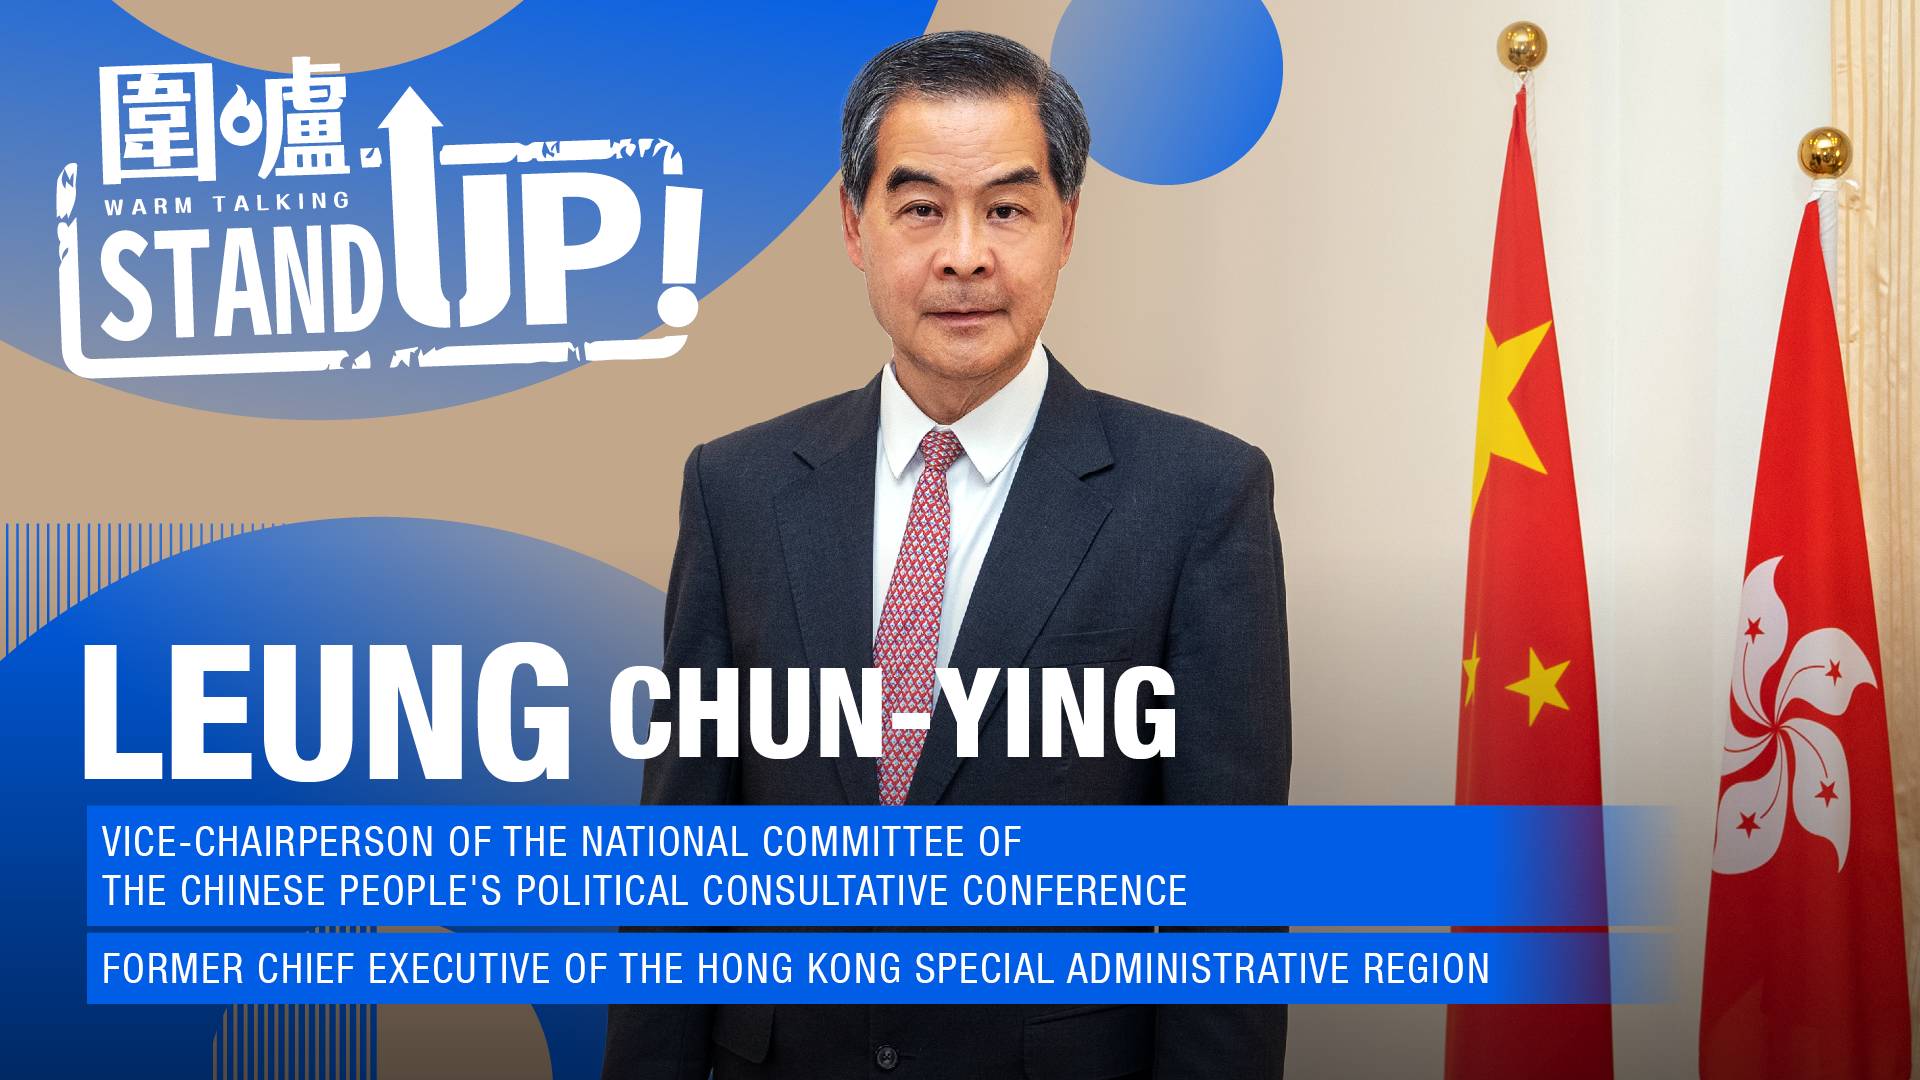 StandUp-|-HK-to-proactively-integrate-into-the-overall-development-of-the-country